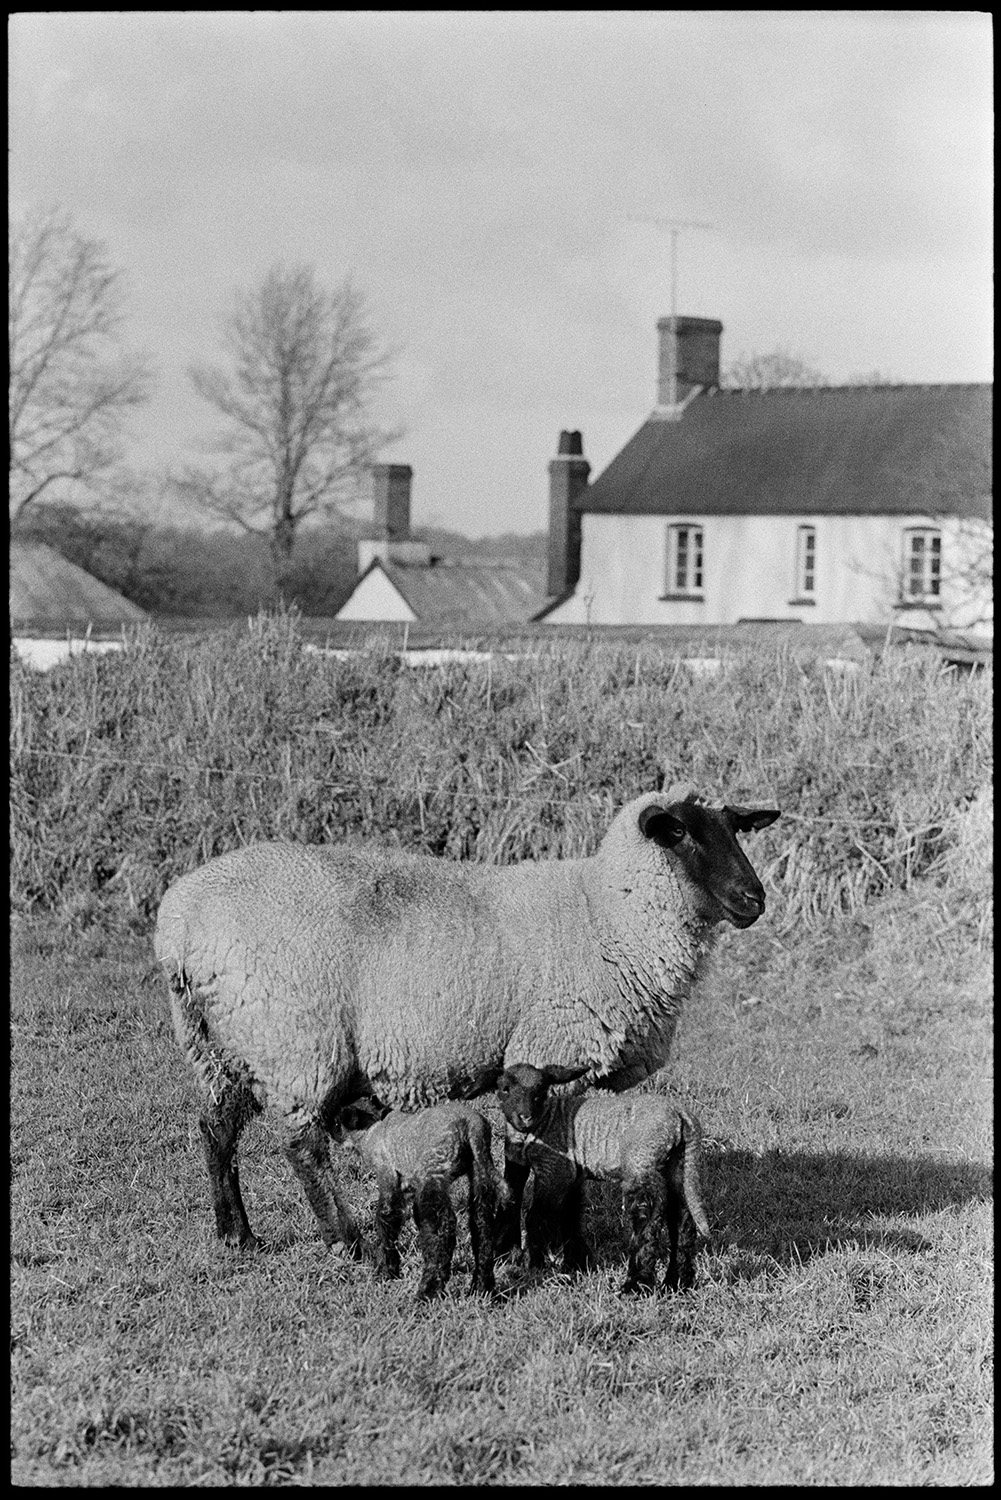 Sheep in field. 
[A ewe and suckling lambs in a field at Parsonage, Iddesleigh. Farm buildings are visible in the background.]